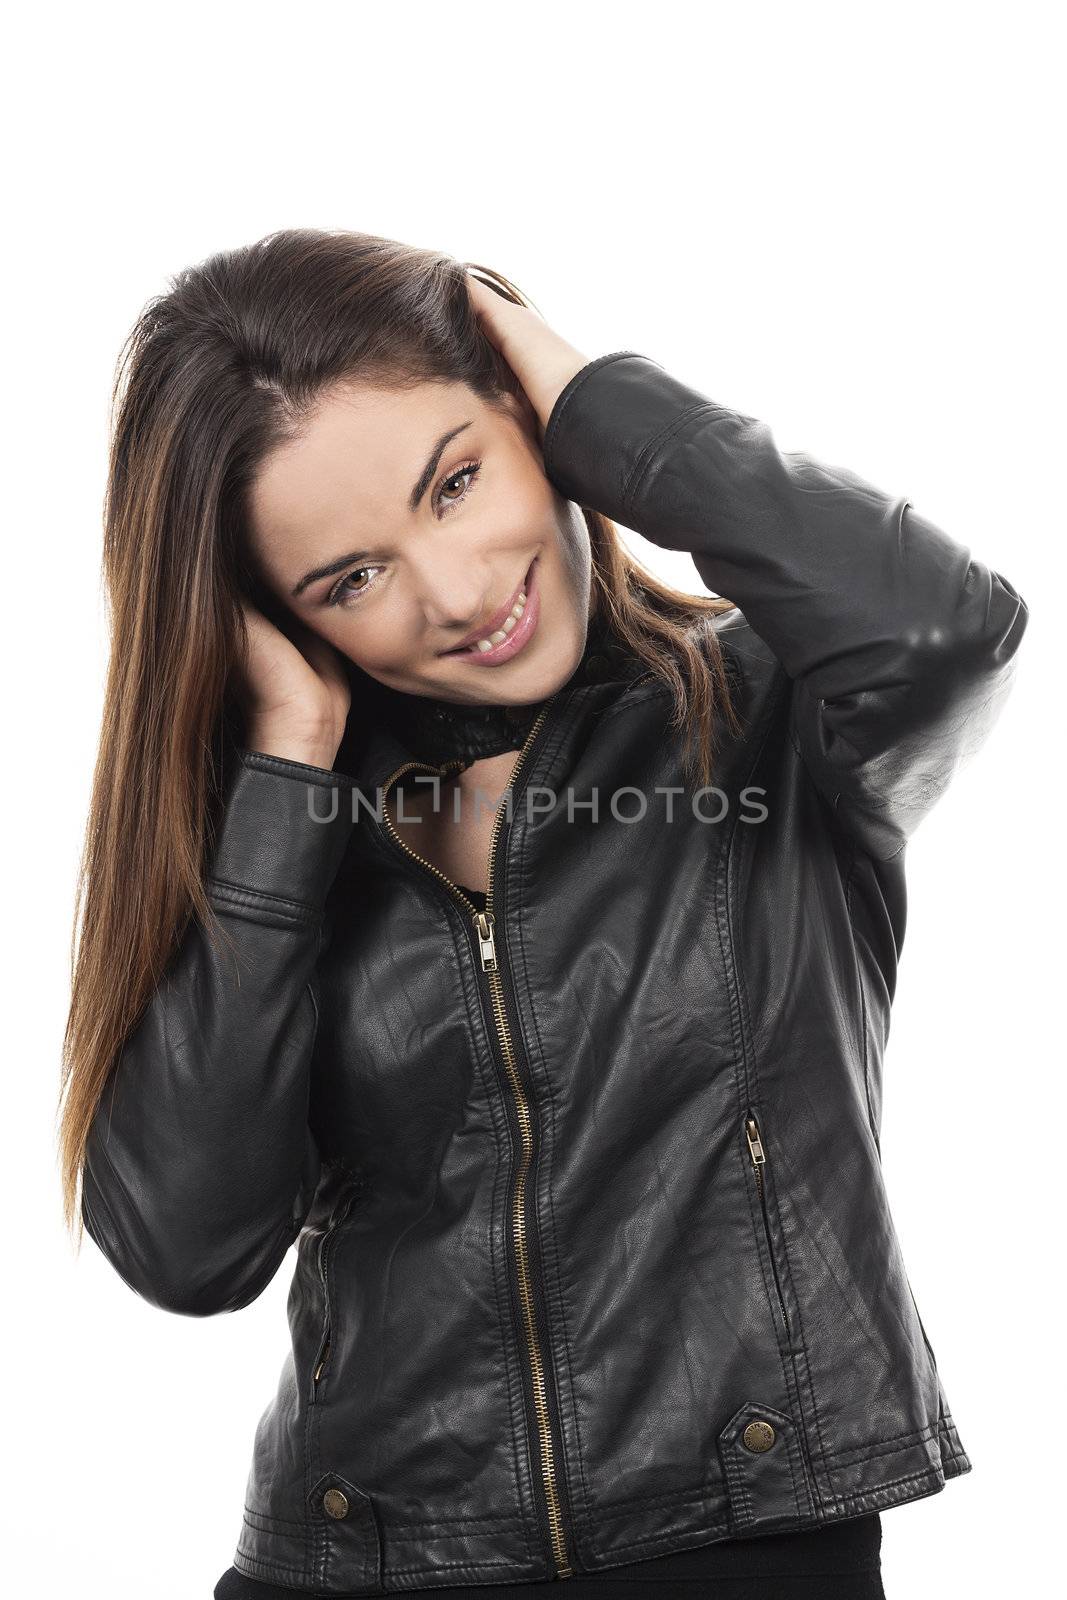 brown hair woman with hand in hair on white background